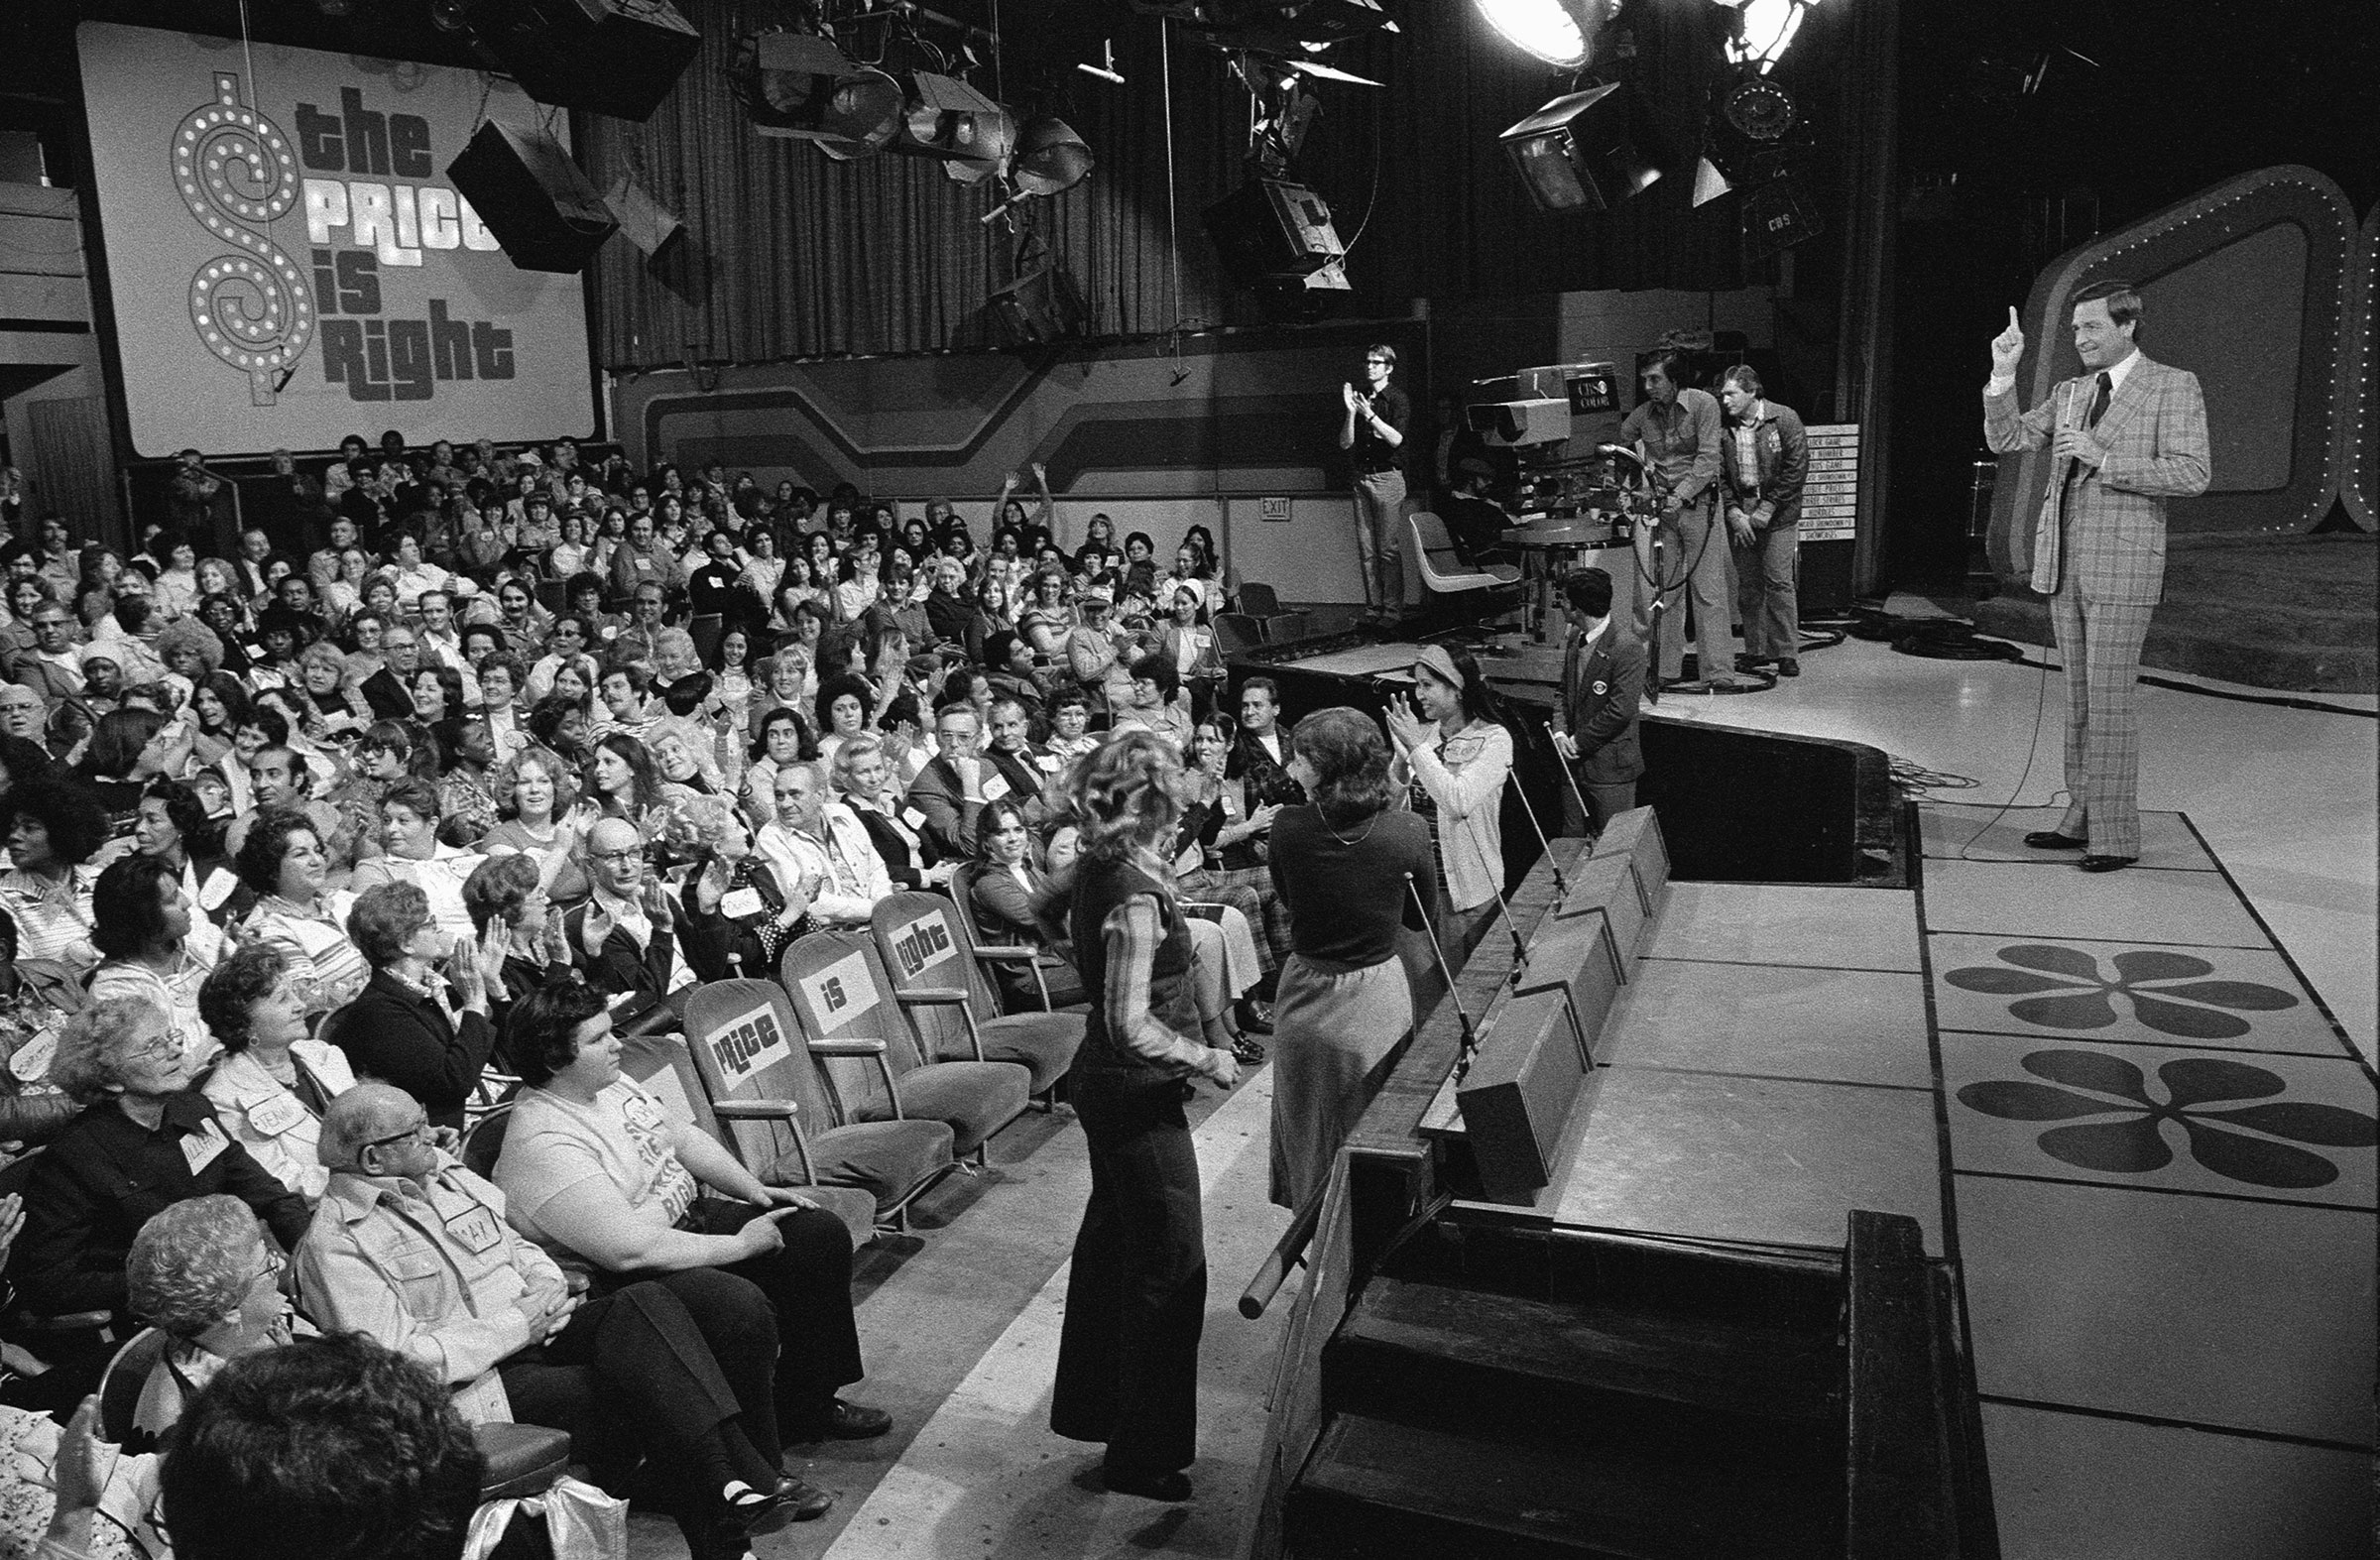 Barker addresses the crowd and contestants on 'The Price Is Right', Feb. 1978.  (CBS Photo Archive/Getty Images)